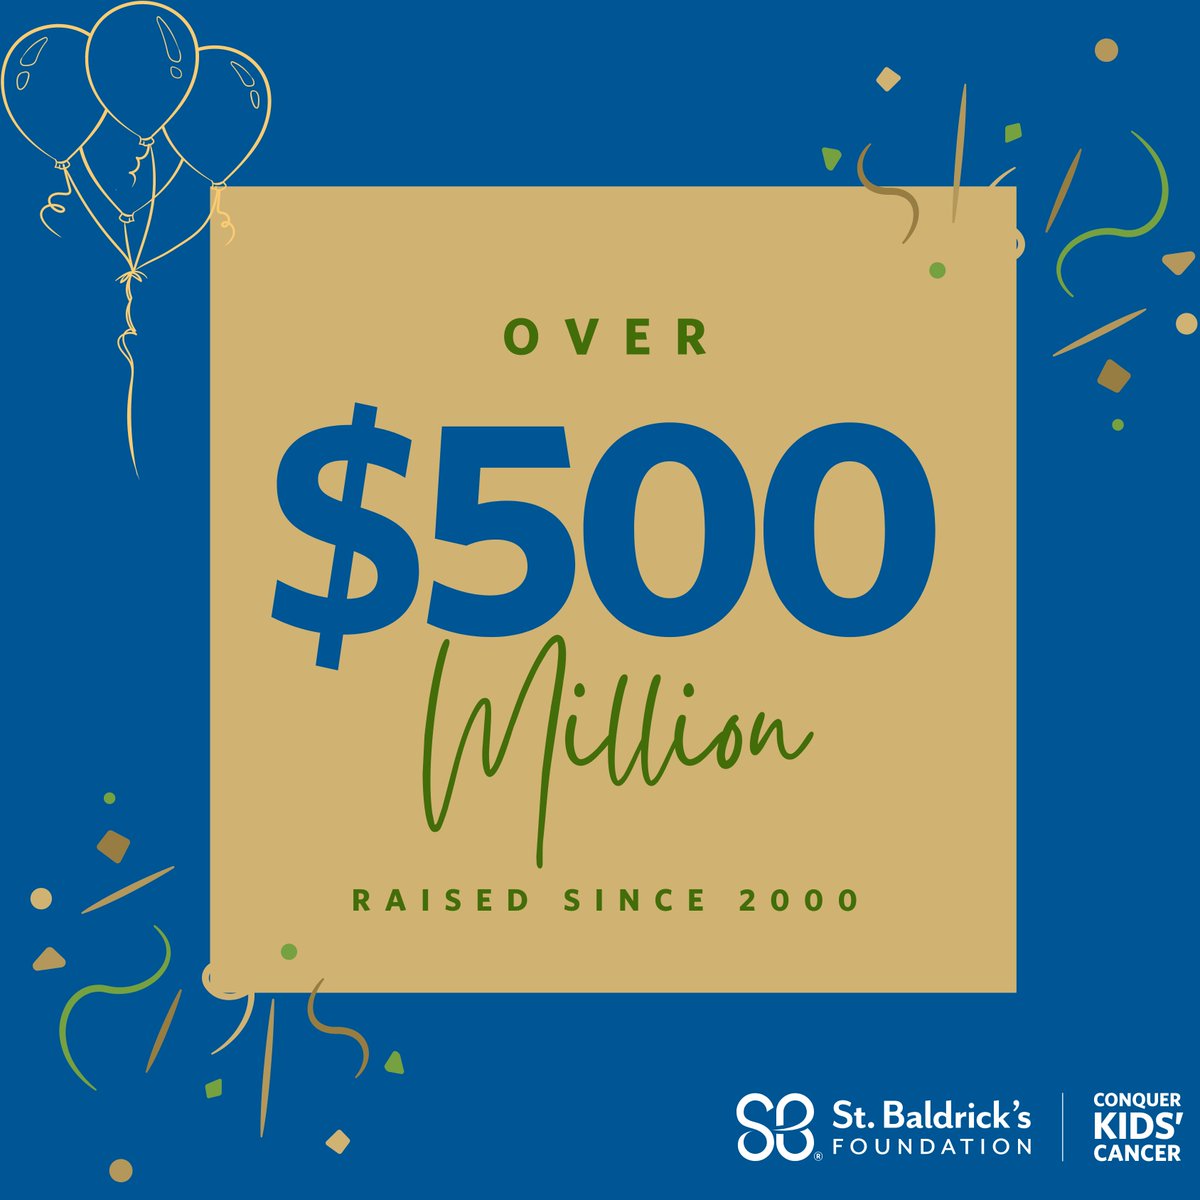 News alert! 📢 Because of amazing folks like you, St. Baldrick's has raised over $500 million since 2000. Thank you to everyone who's helped make an impact in the lives of #kids with cancer. Together, let's continue to give #hope to kids and their families. 🙌